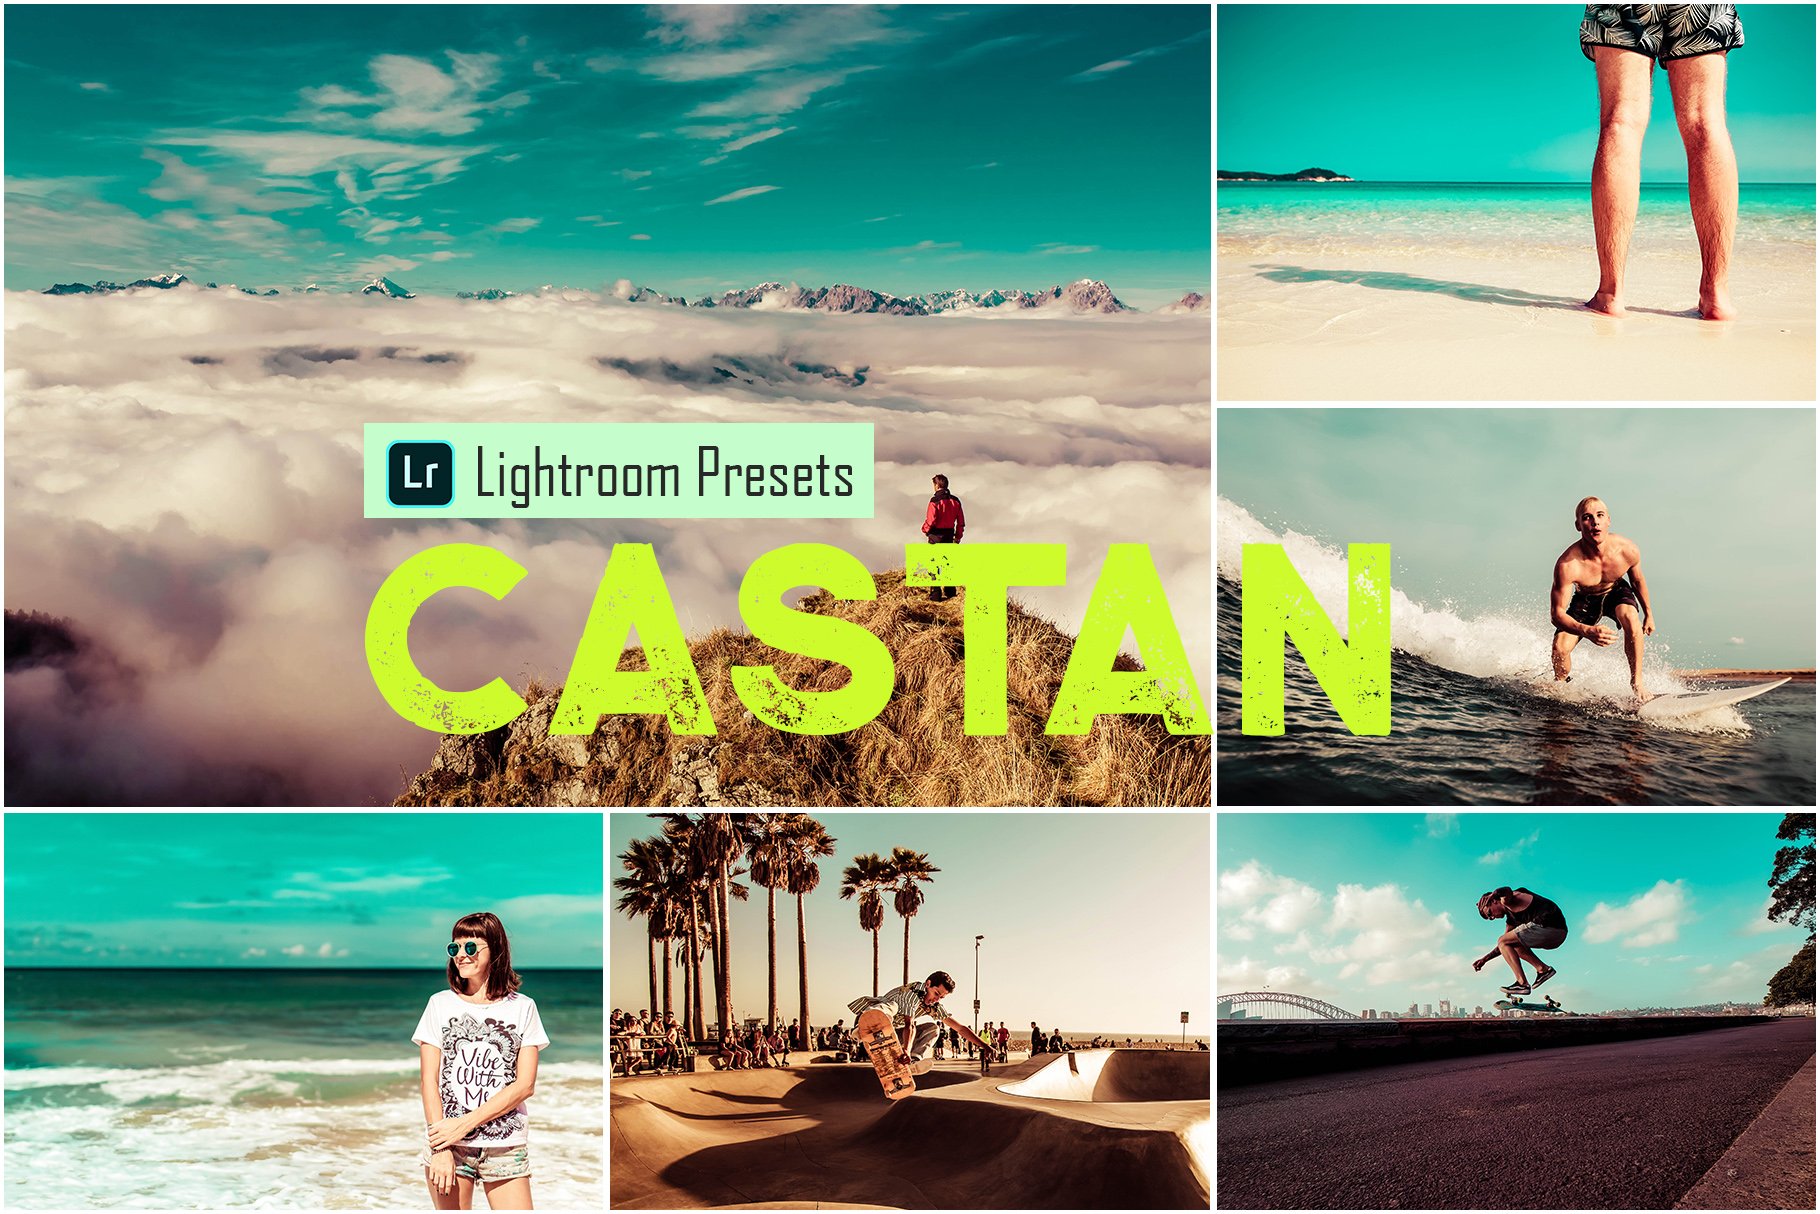 Castan LR Mobile and ACR Presetscover image.